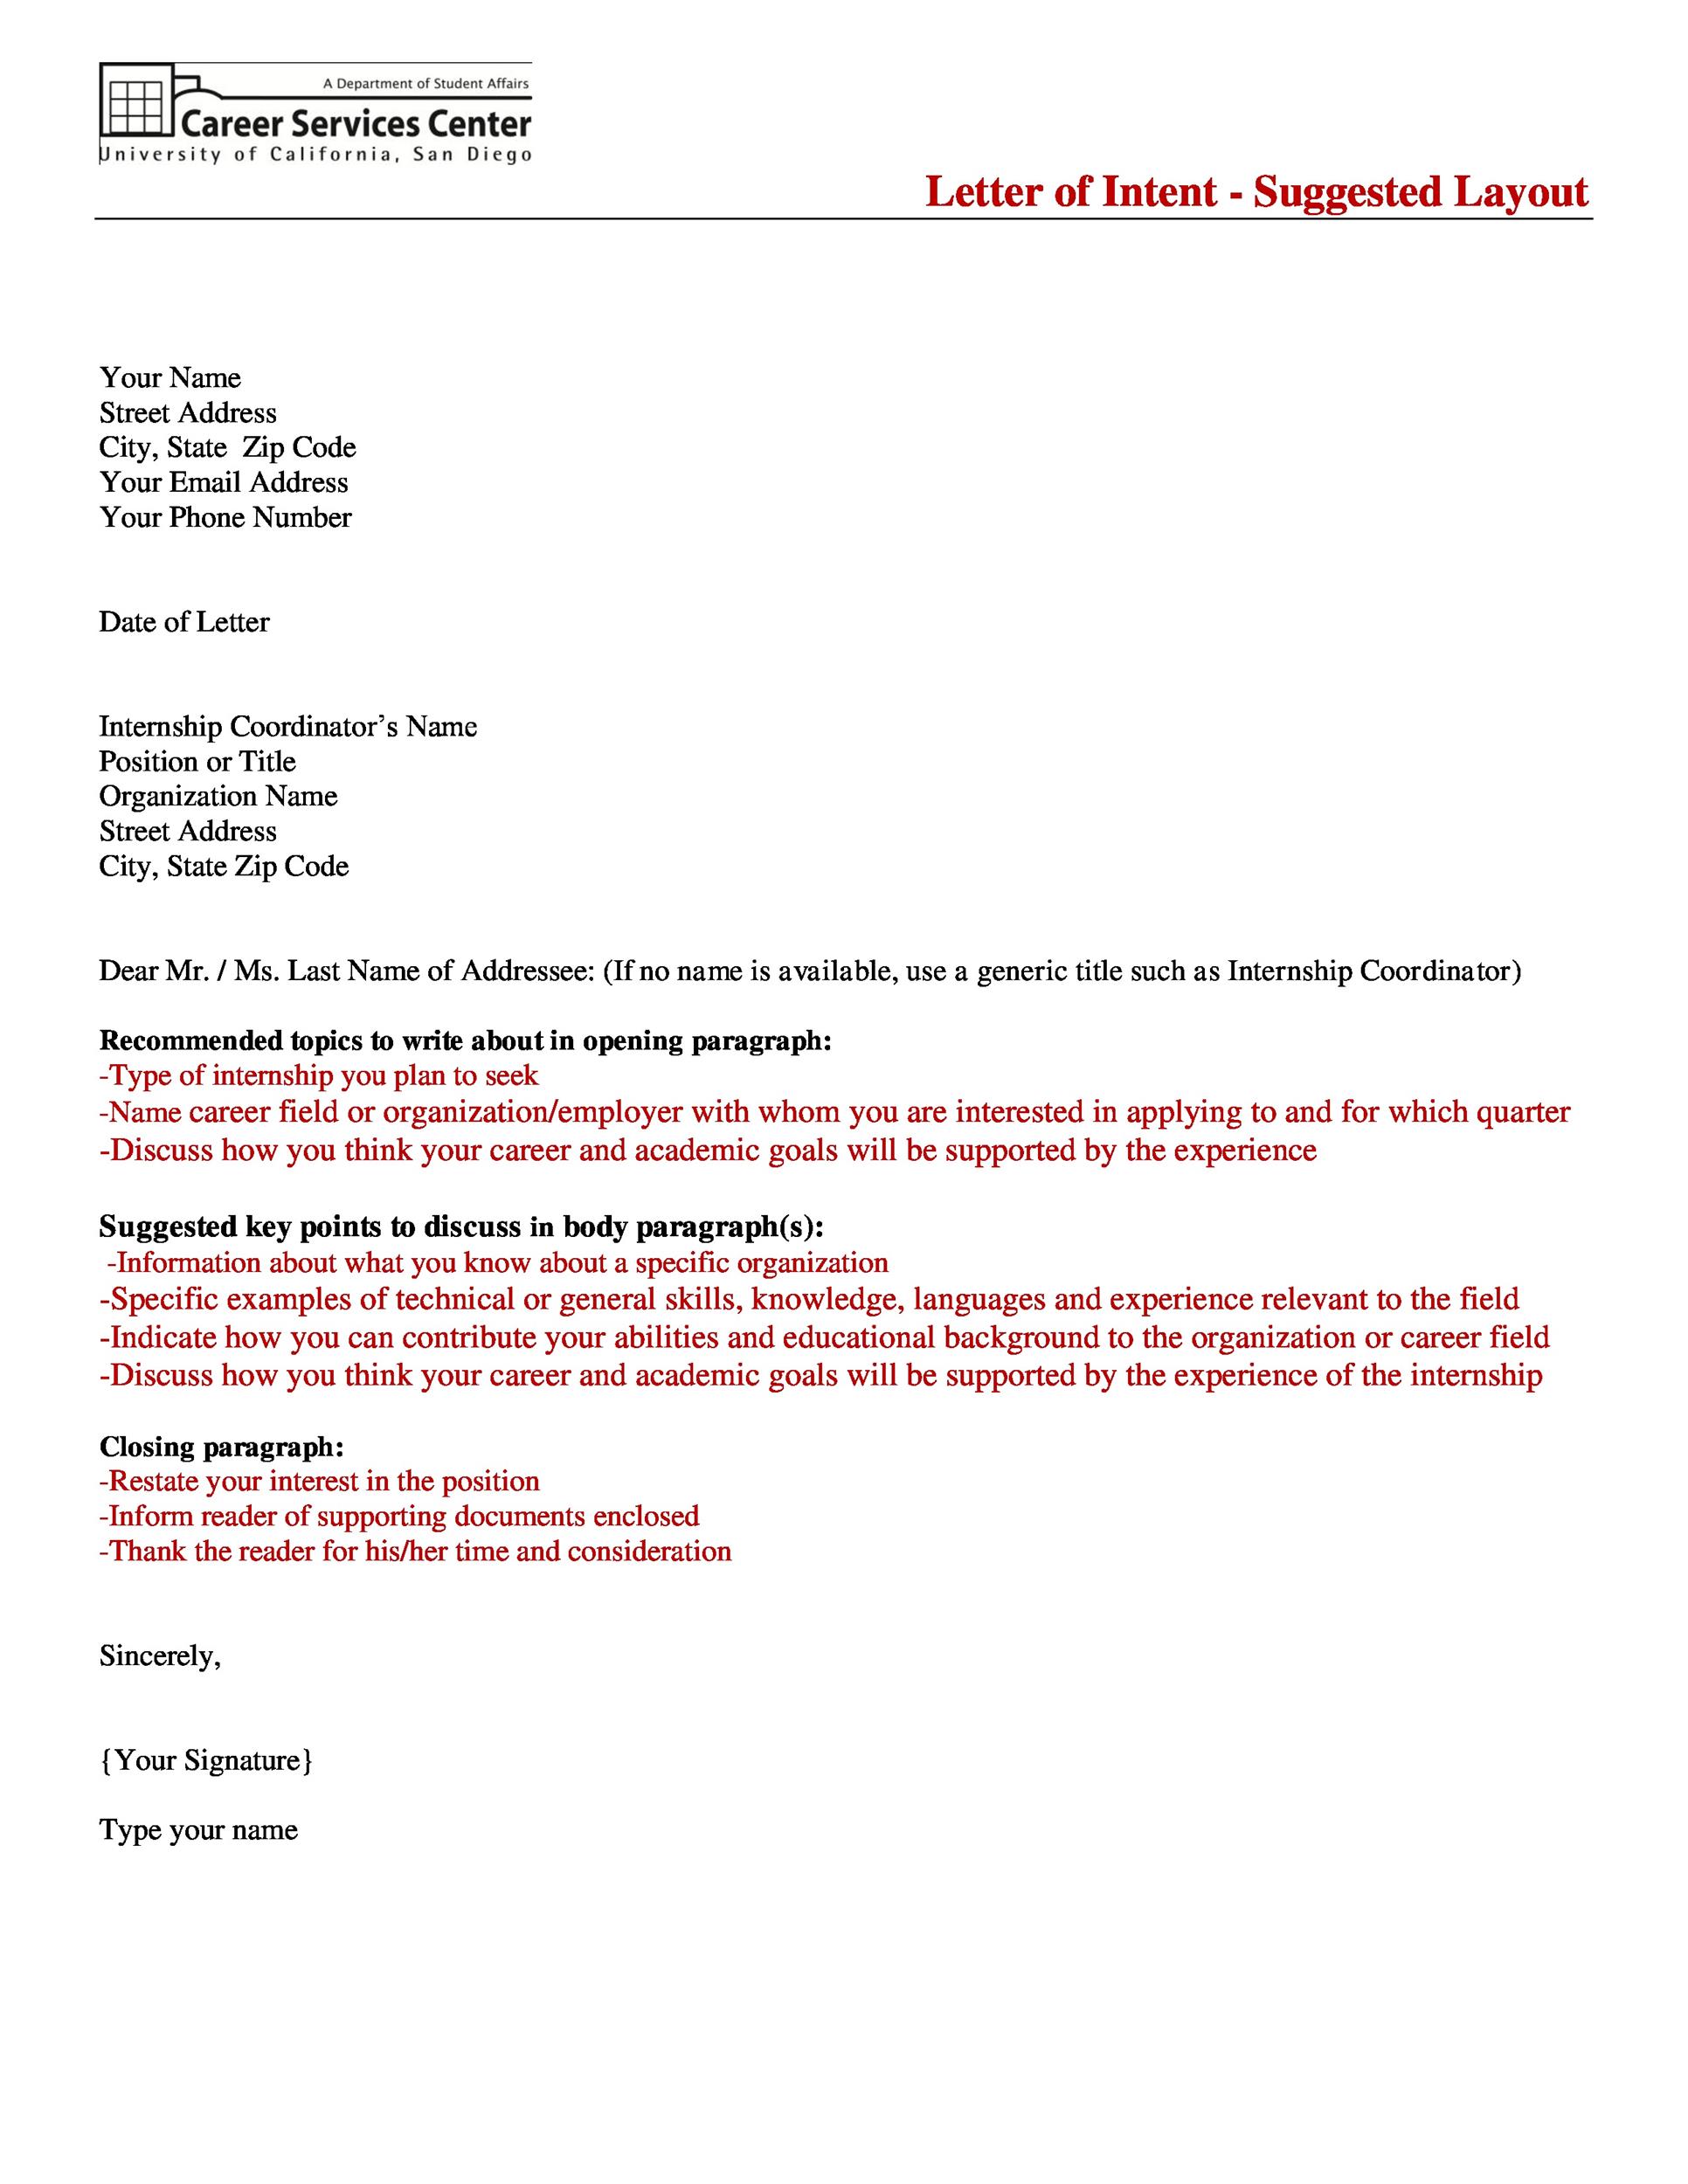 Letter To Prospective Employers from templatelab.com